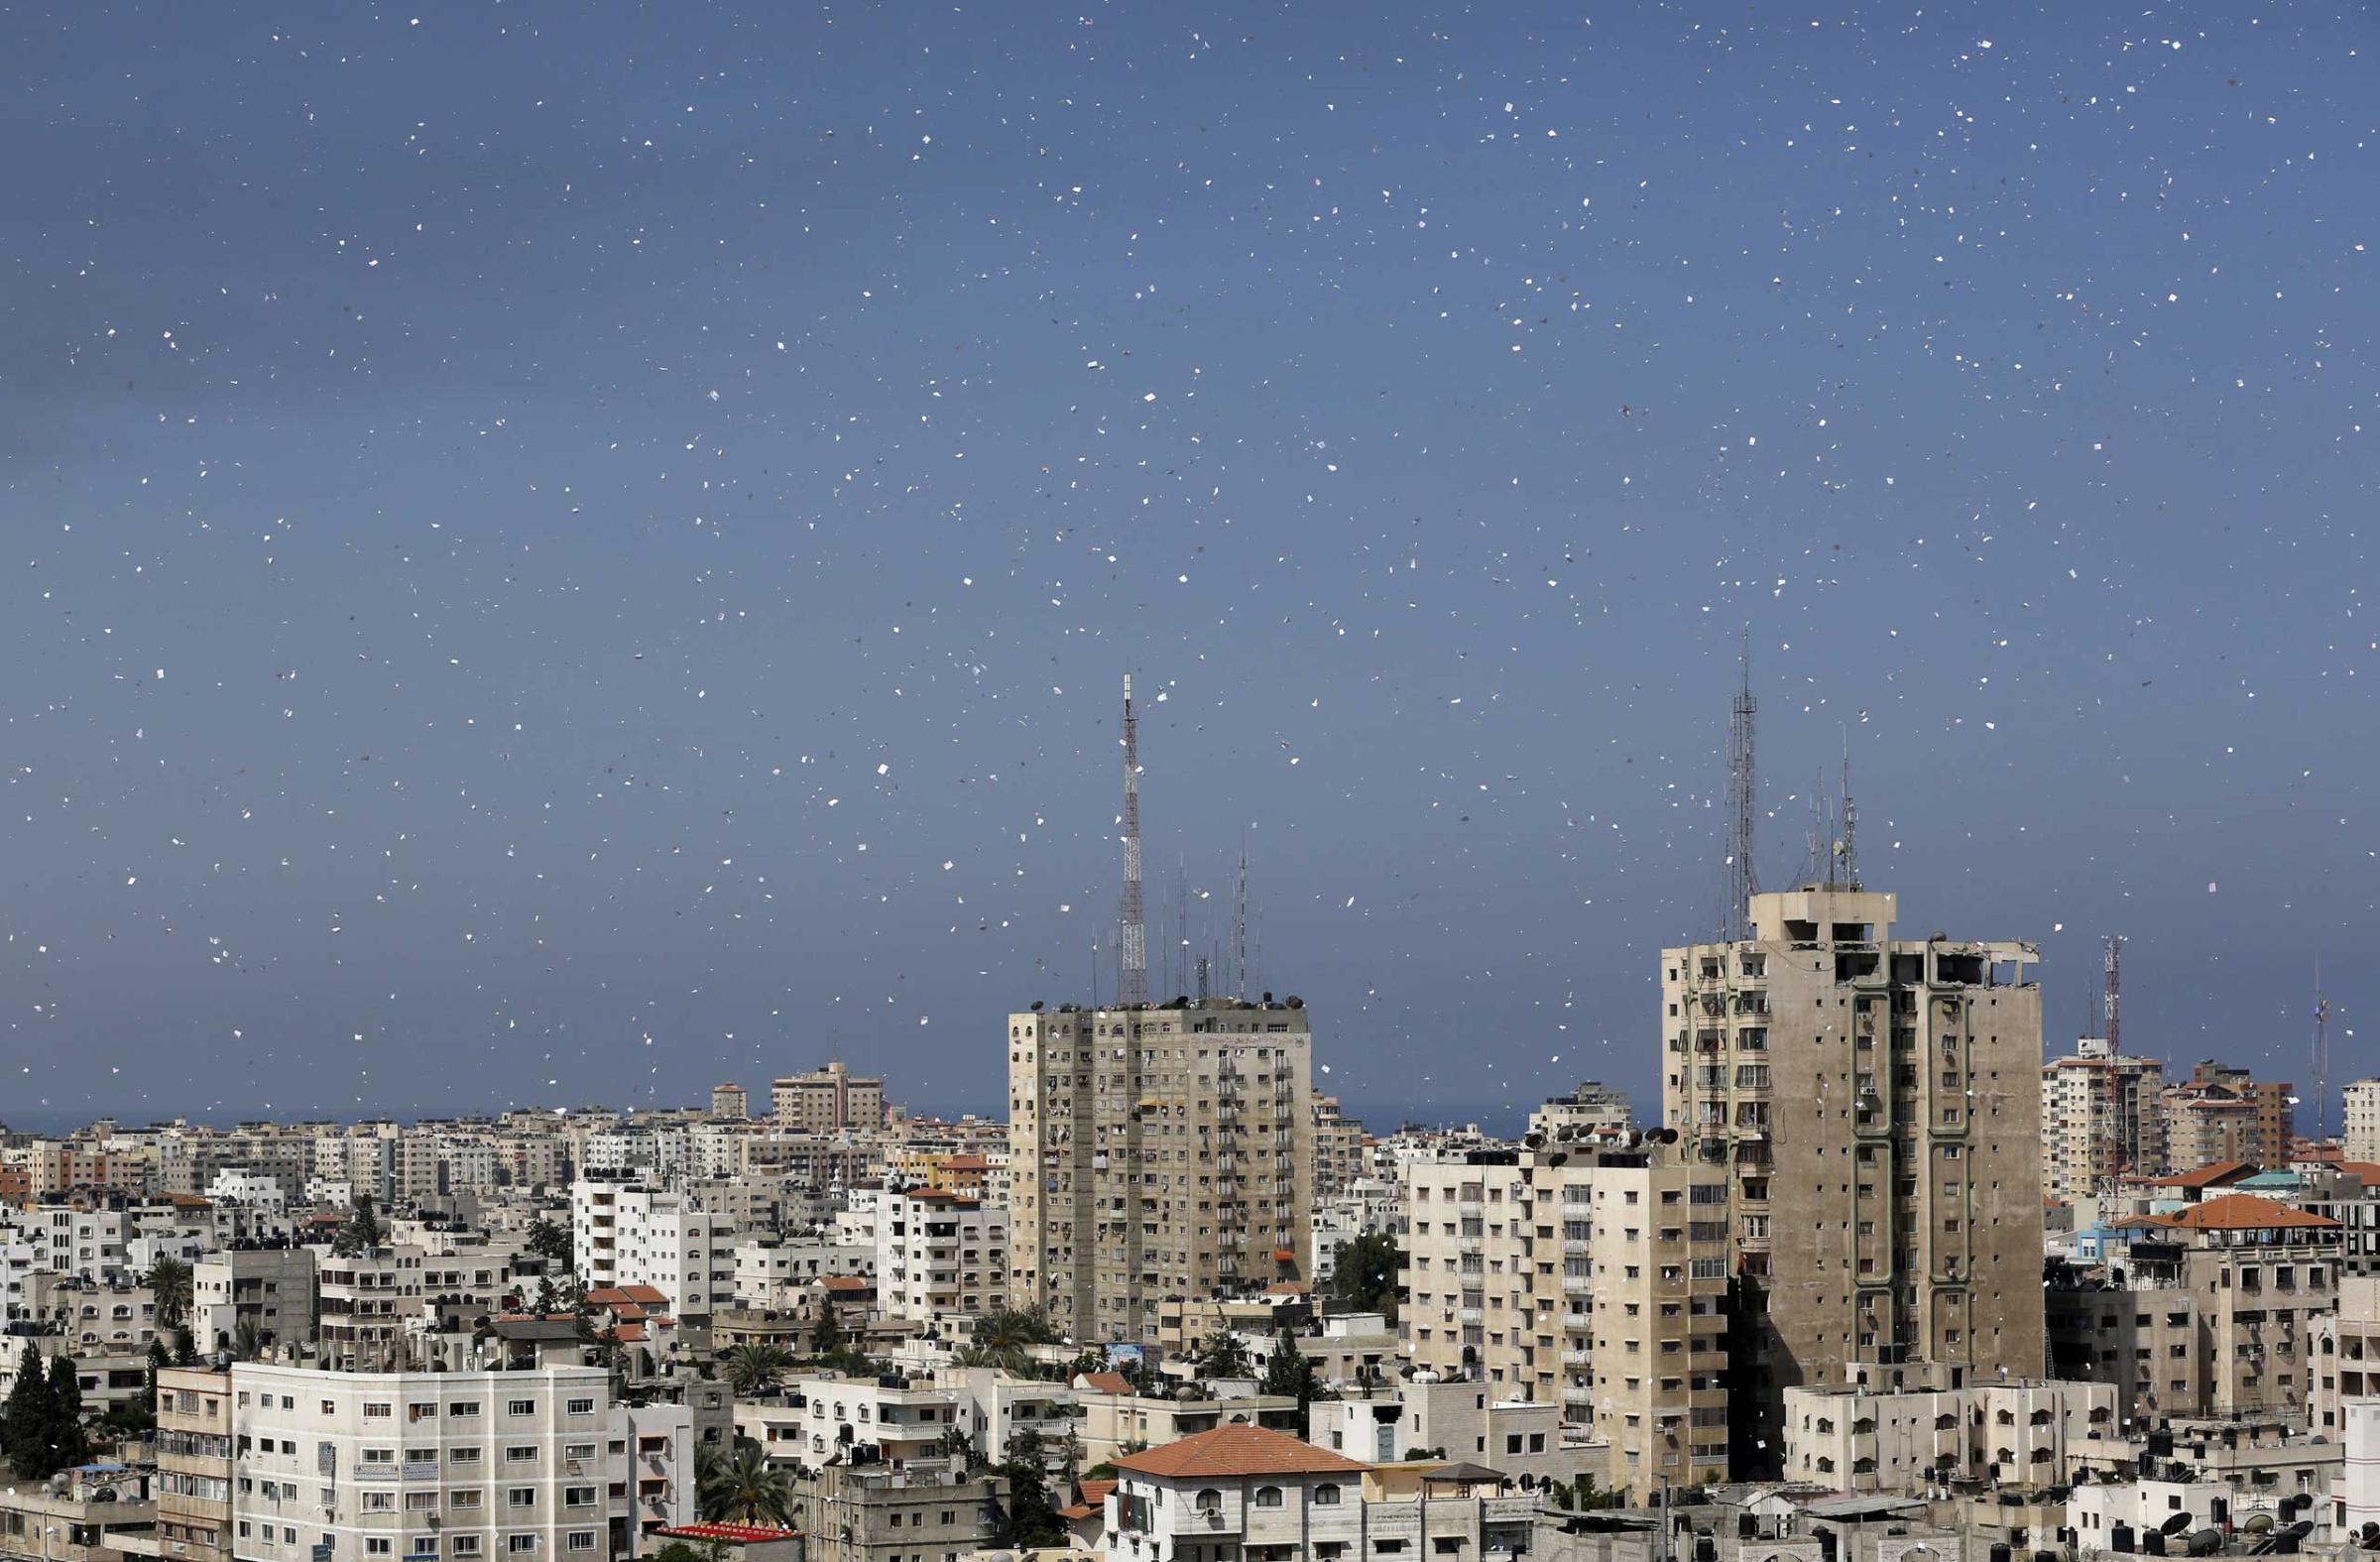 Flyers are dropped over Gaza City by the Israeli army urging residents to evacuate their homes, July 30, 2014.